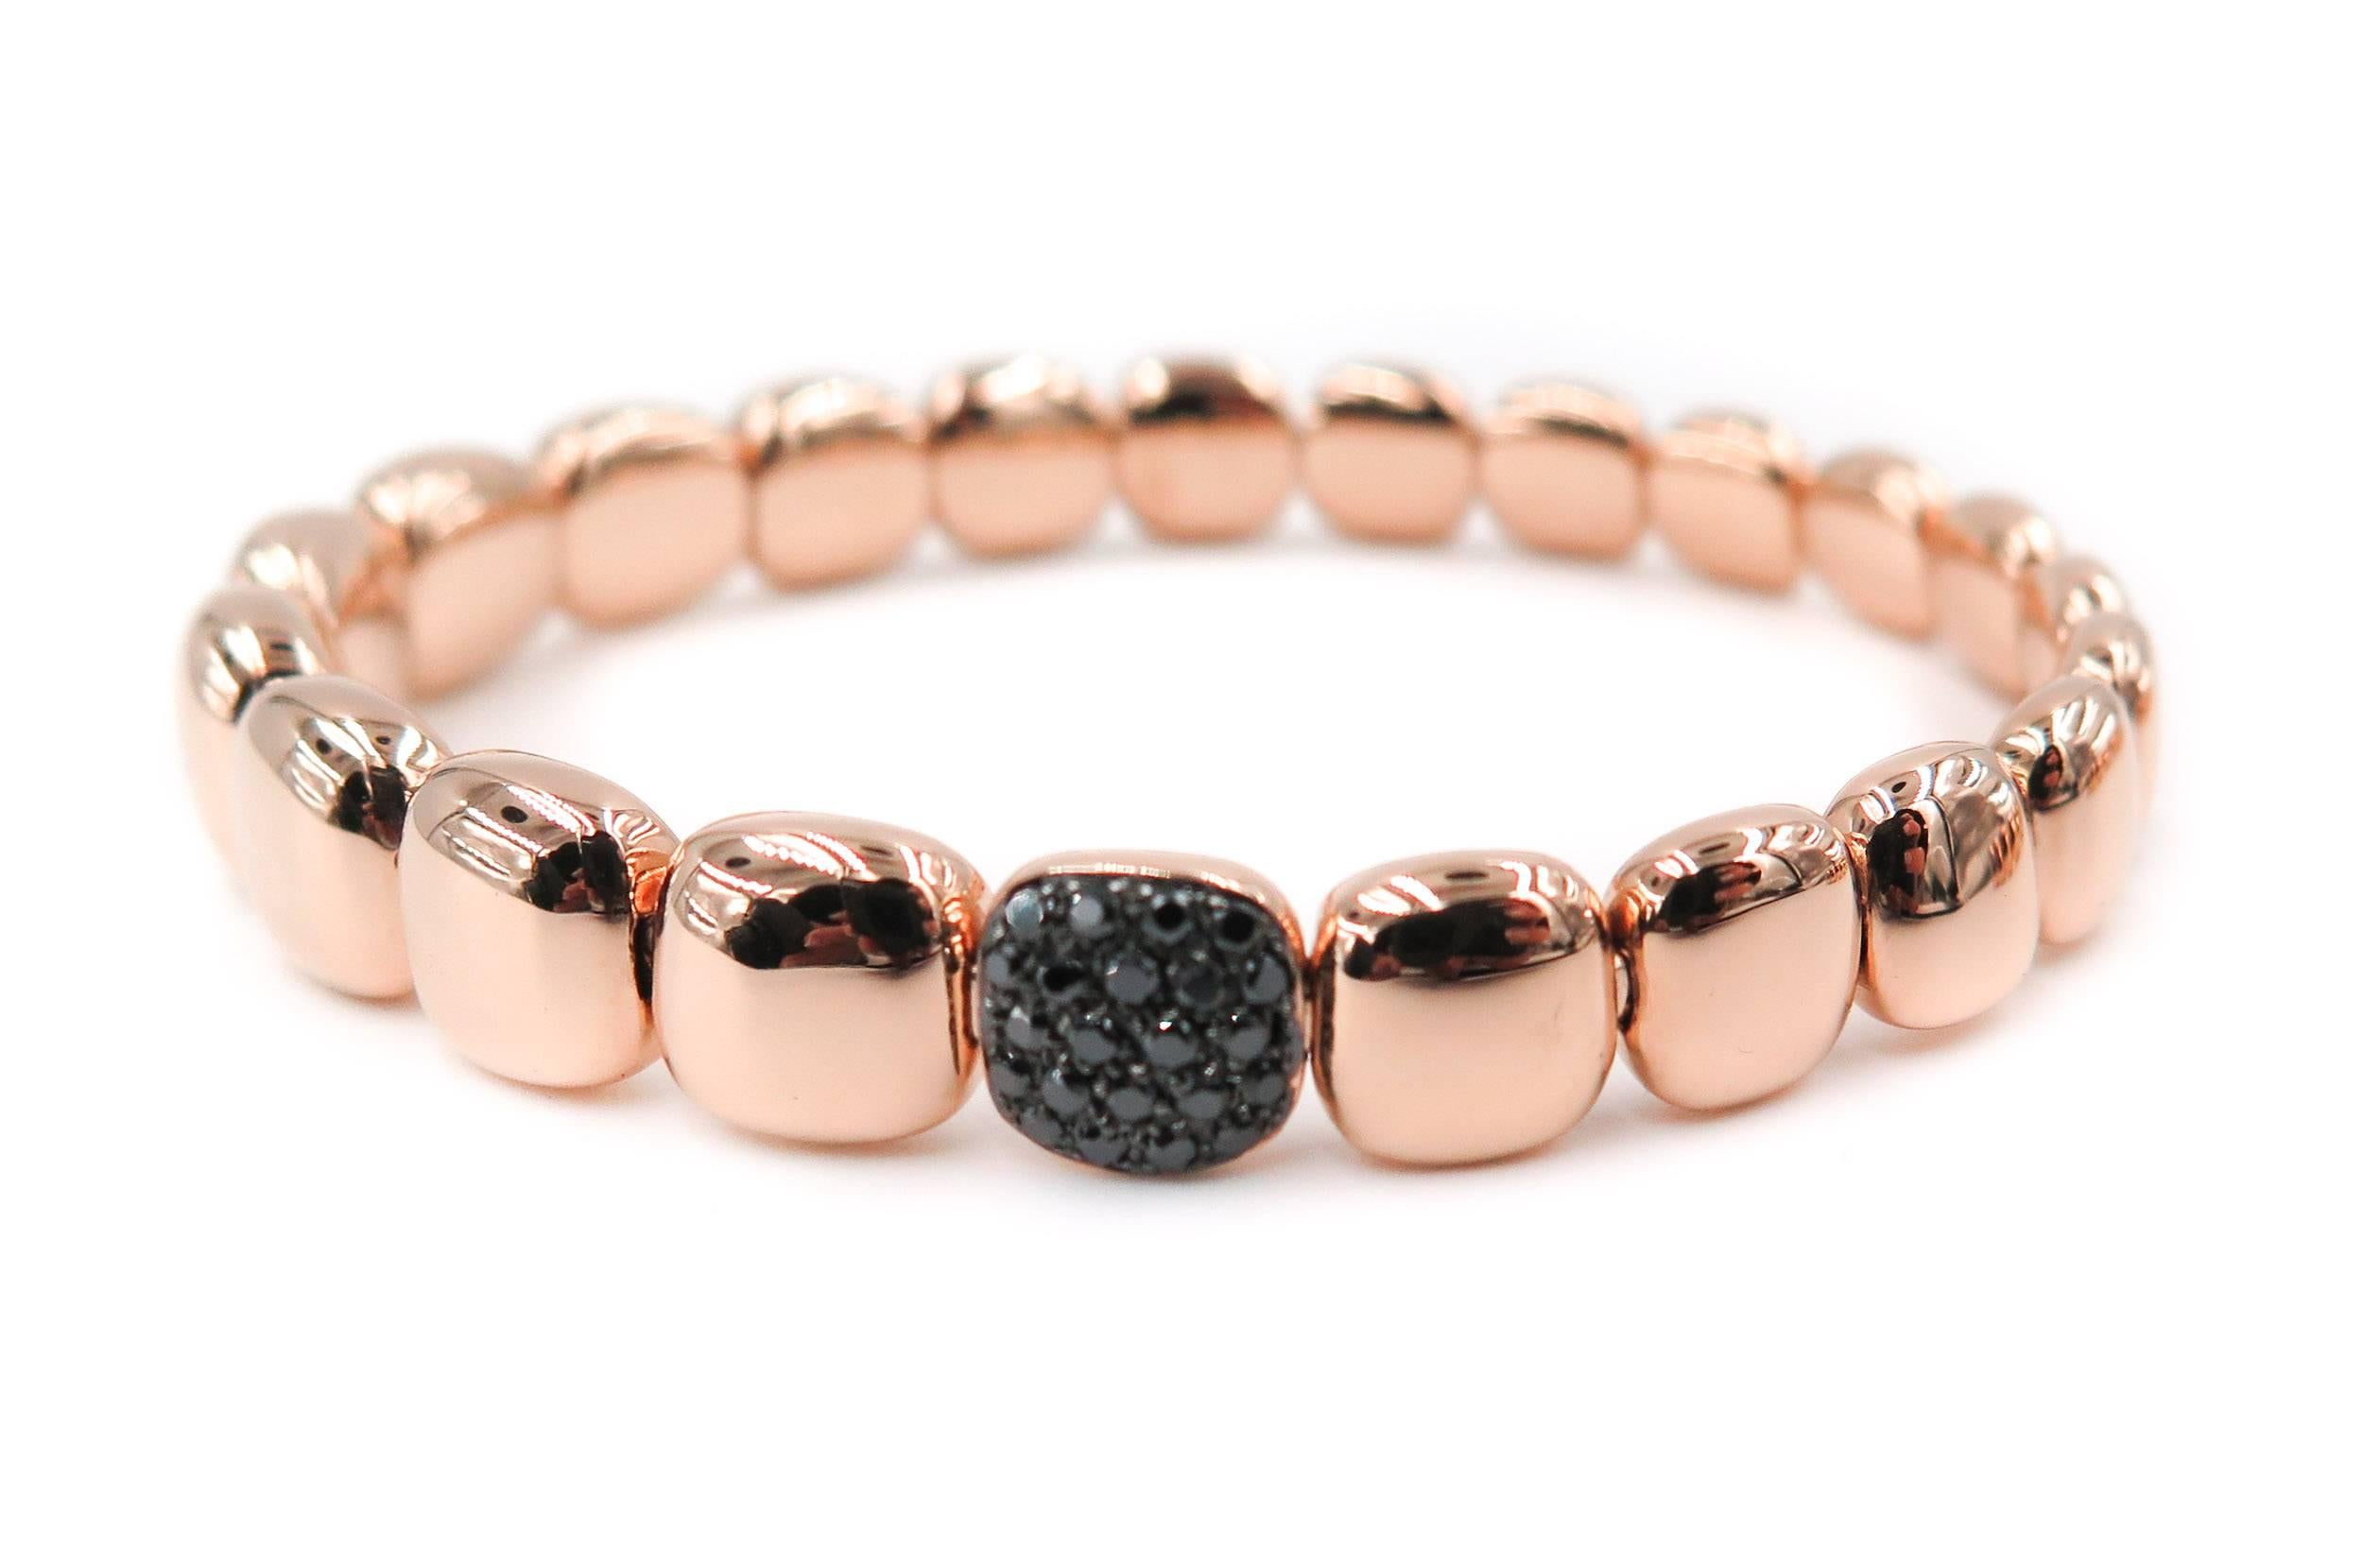 This graceful 18k rose gold cushion shaped beads bracelet, handcrafted in Italy featuring 20 sparkling round black diamonds set in the center bead. Bracelet is constructed with a unique stainless steel coil mechanism that allows the bracelet to